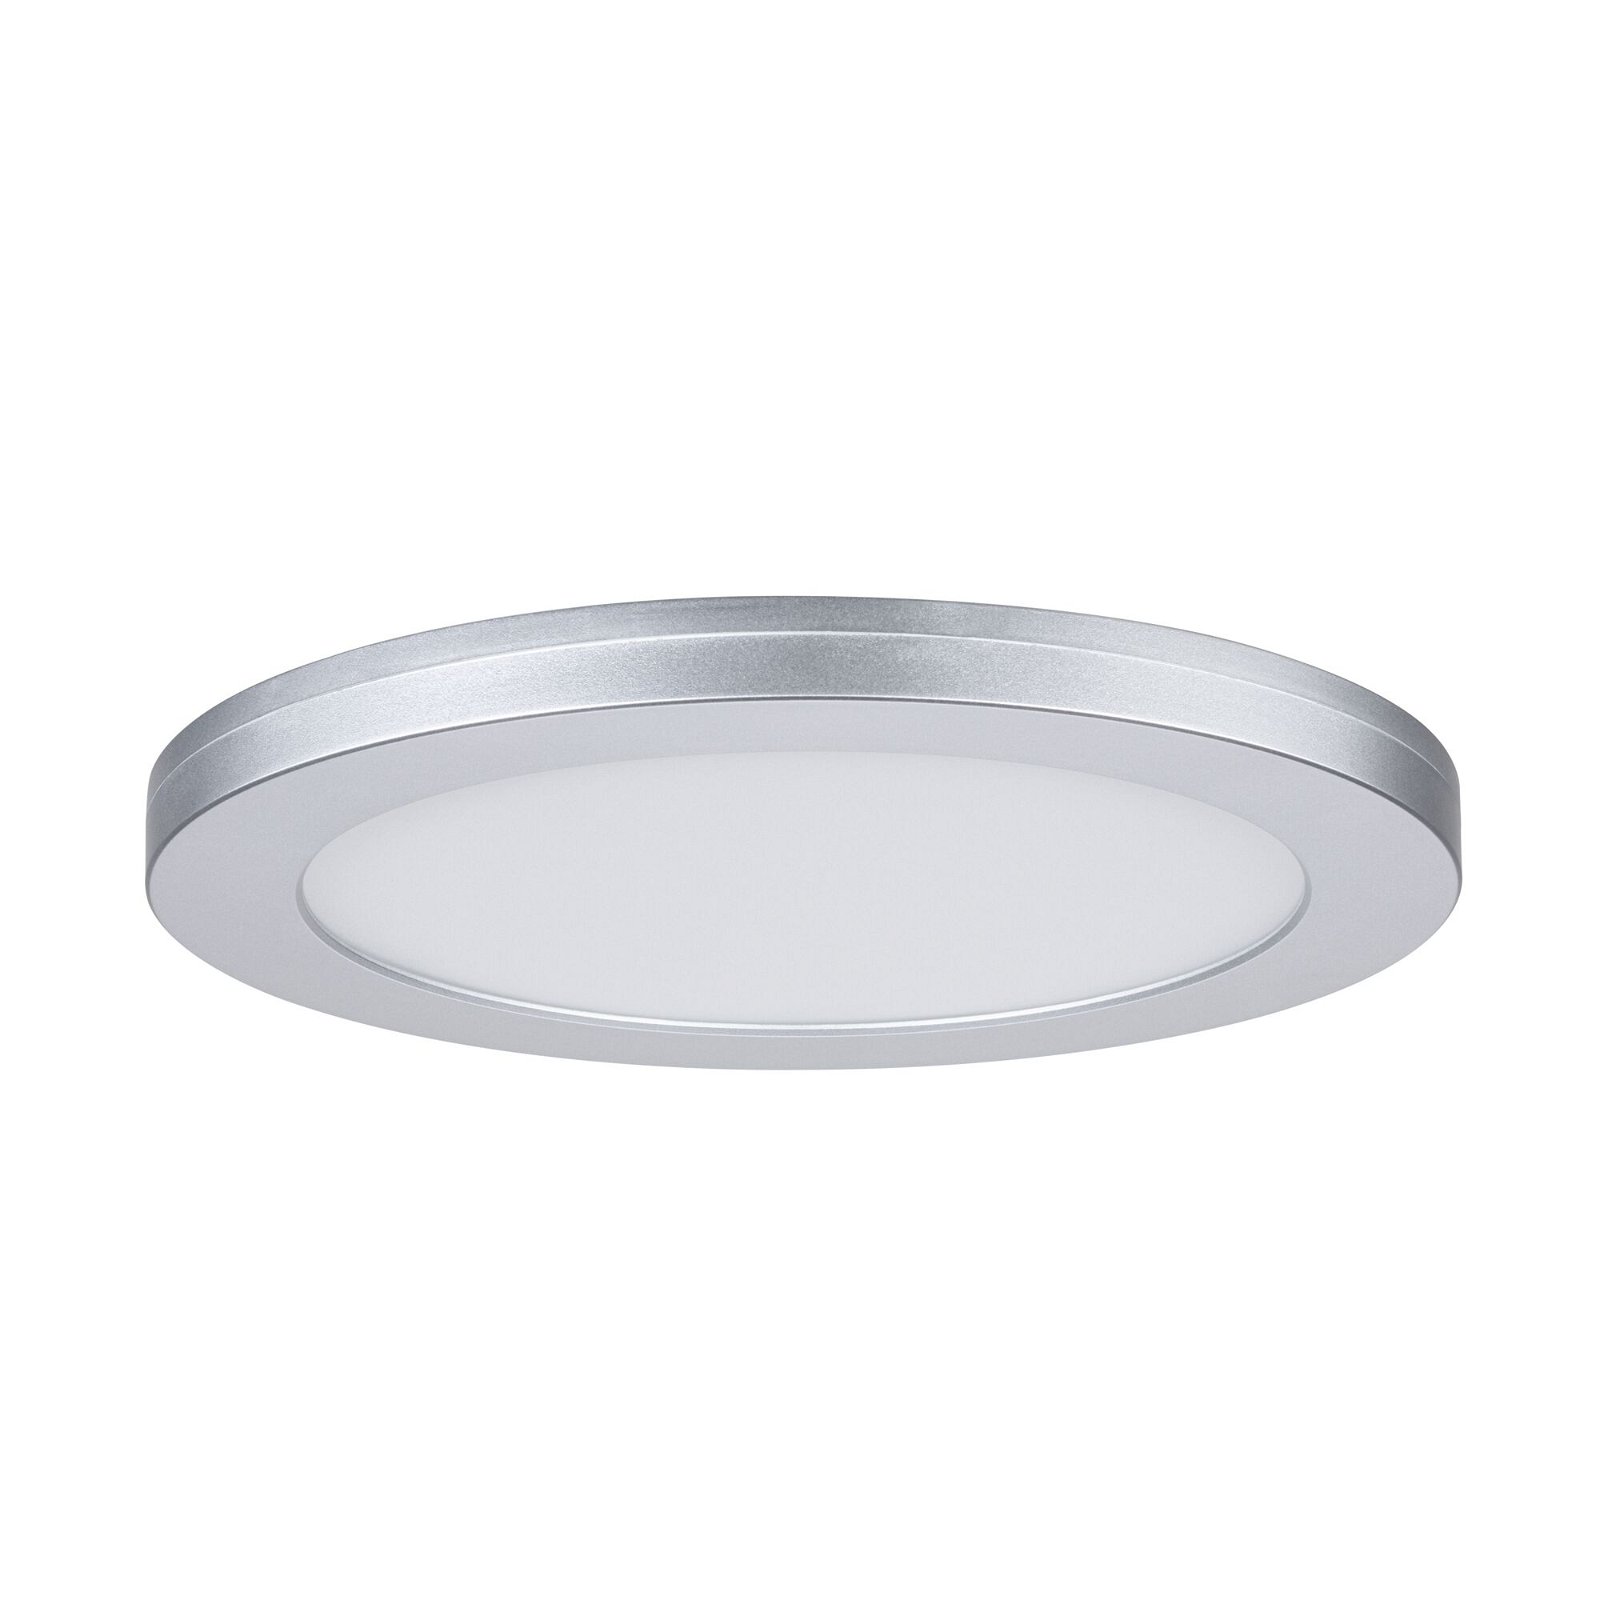 LED-inbouwpaneel 2in1 Cover-it rond 225mm 16,5W 1200lm 4000K Chroom mat